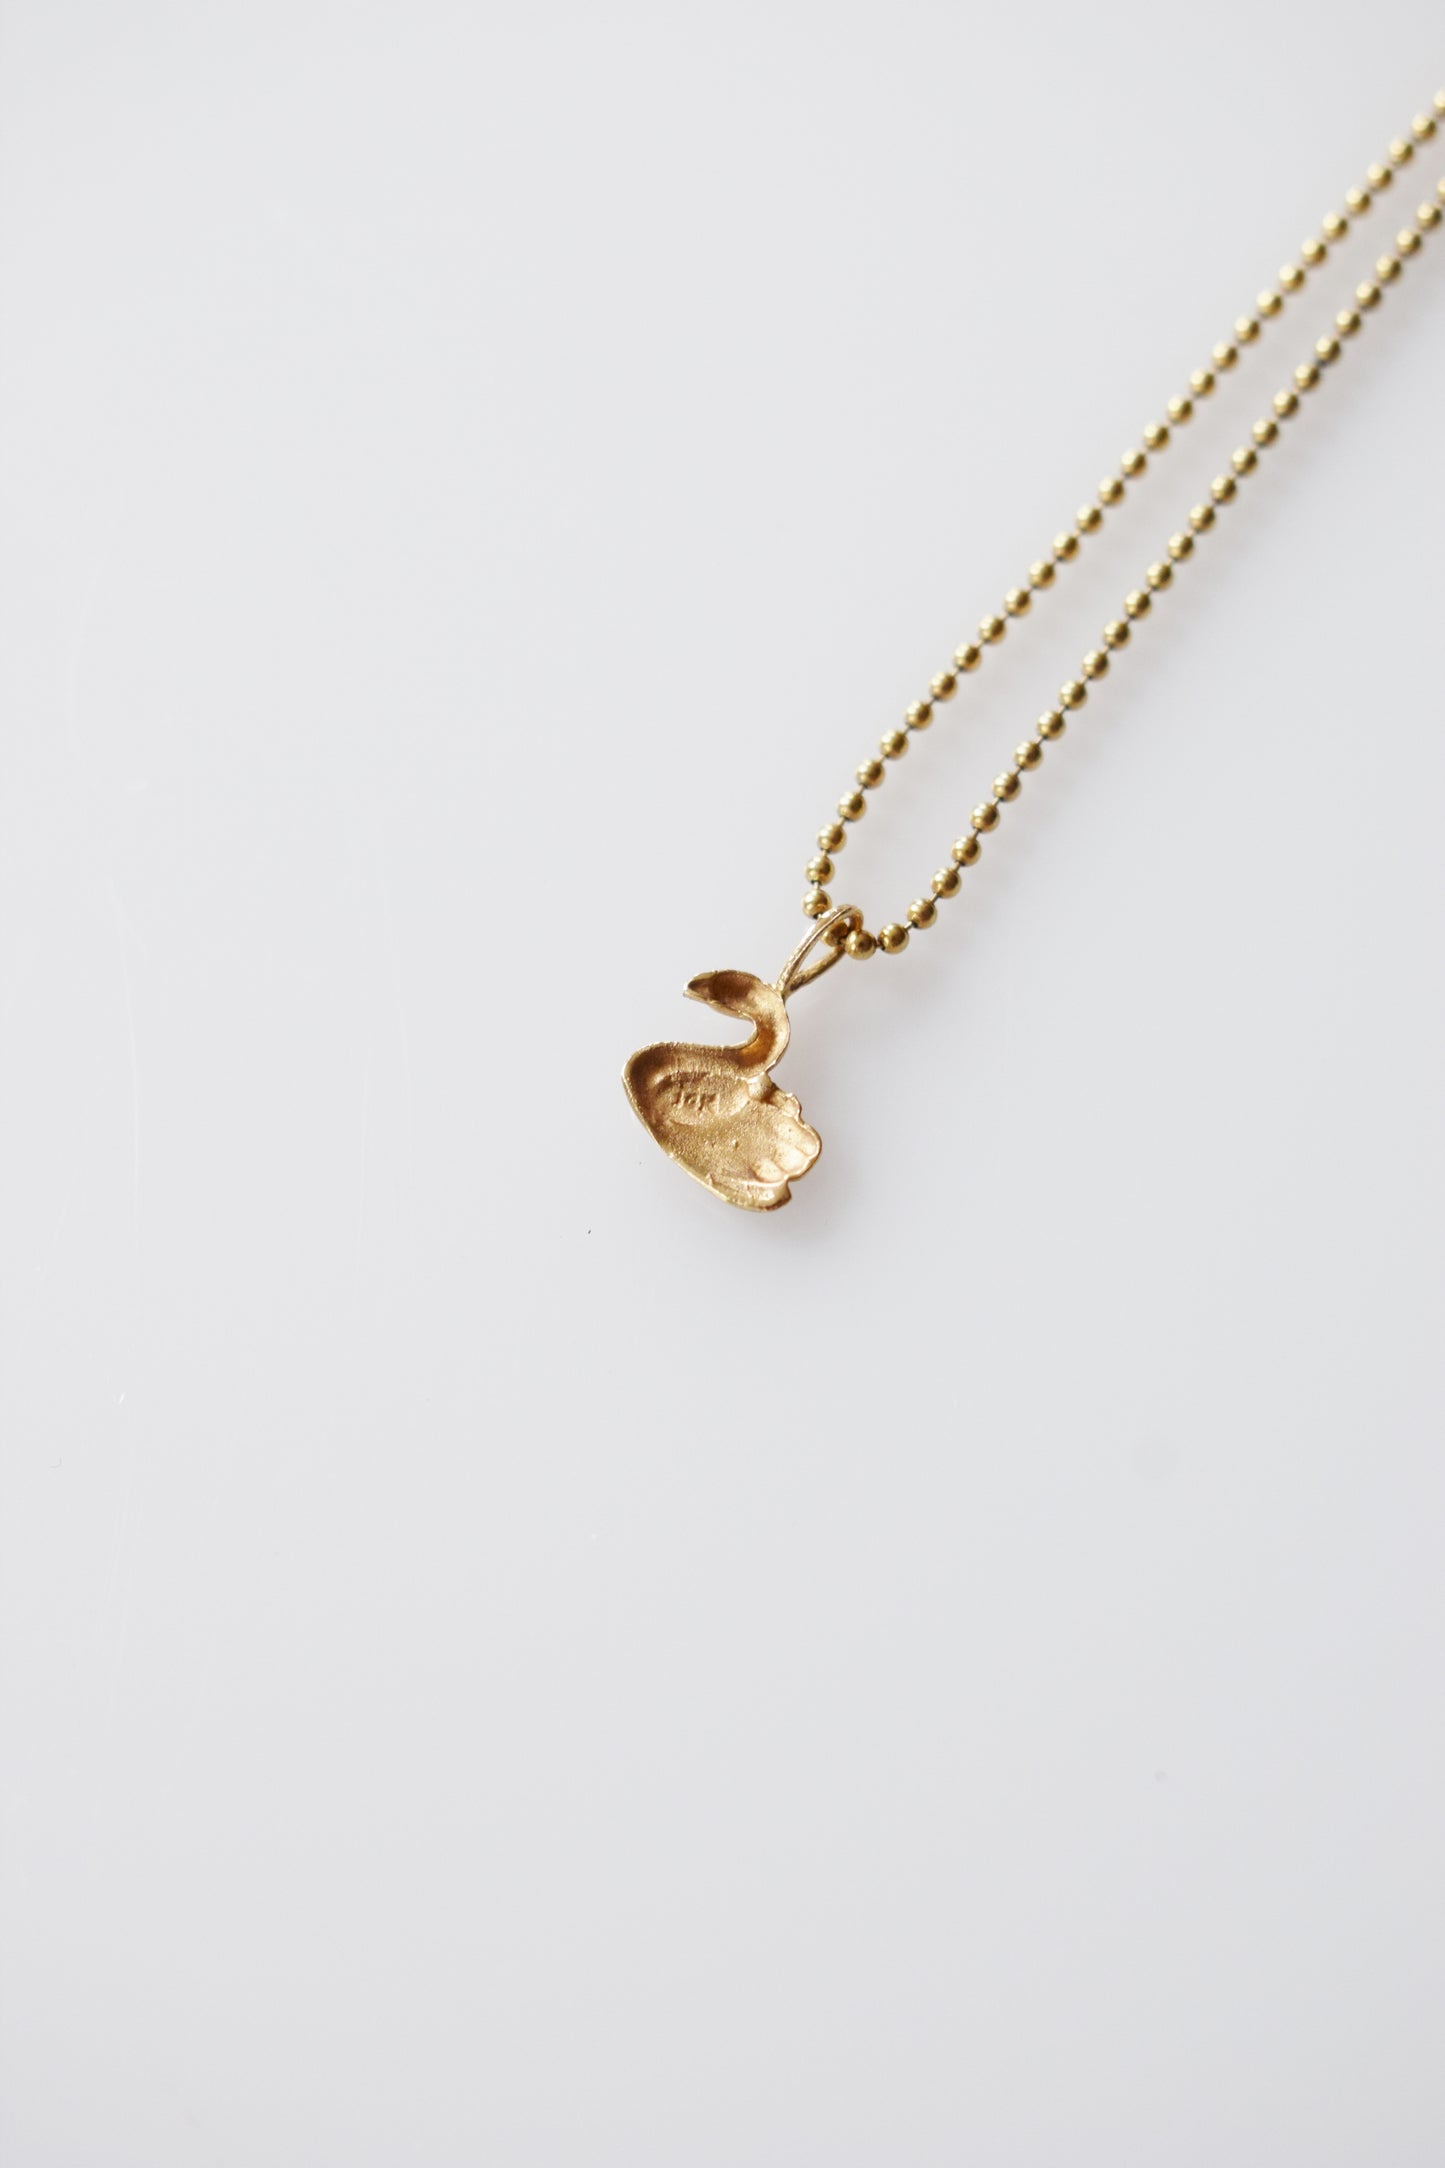 Vintage 10k Gold Swan Charm on Chain